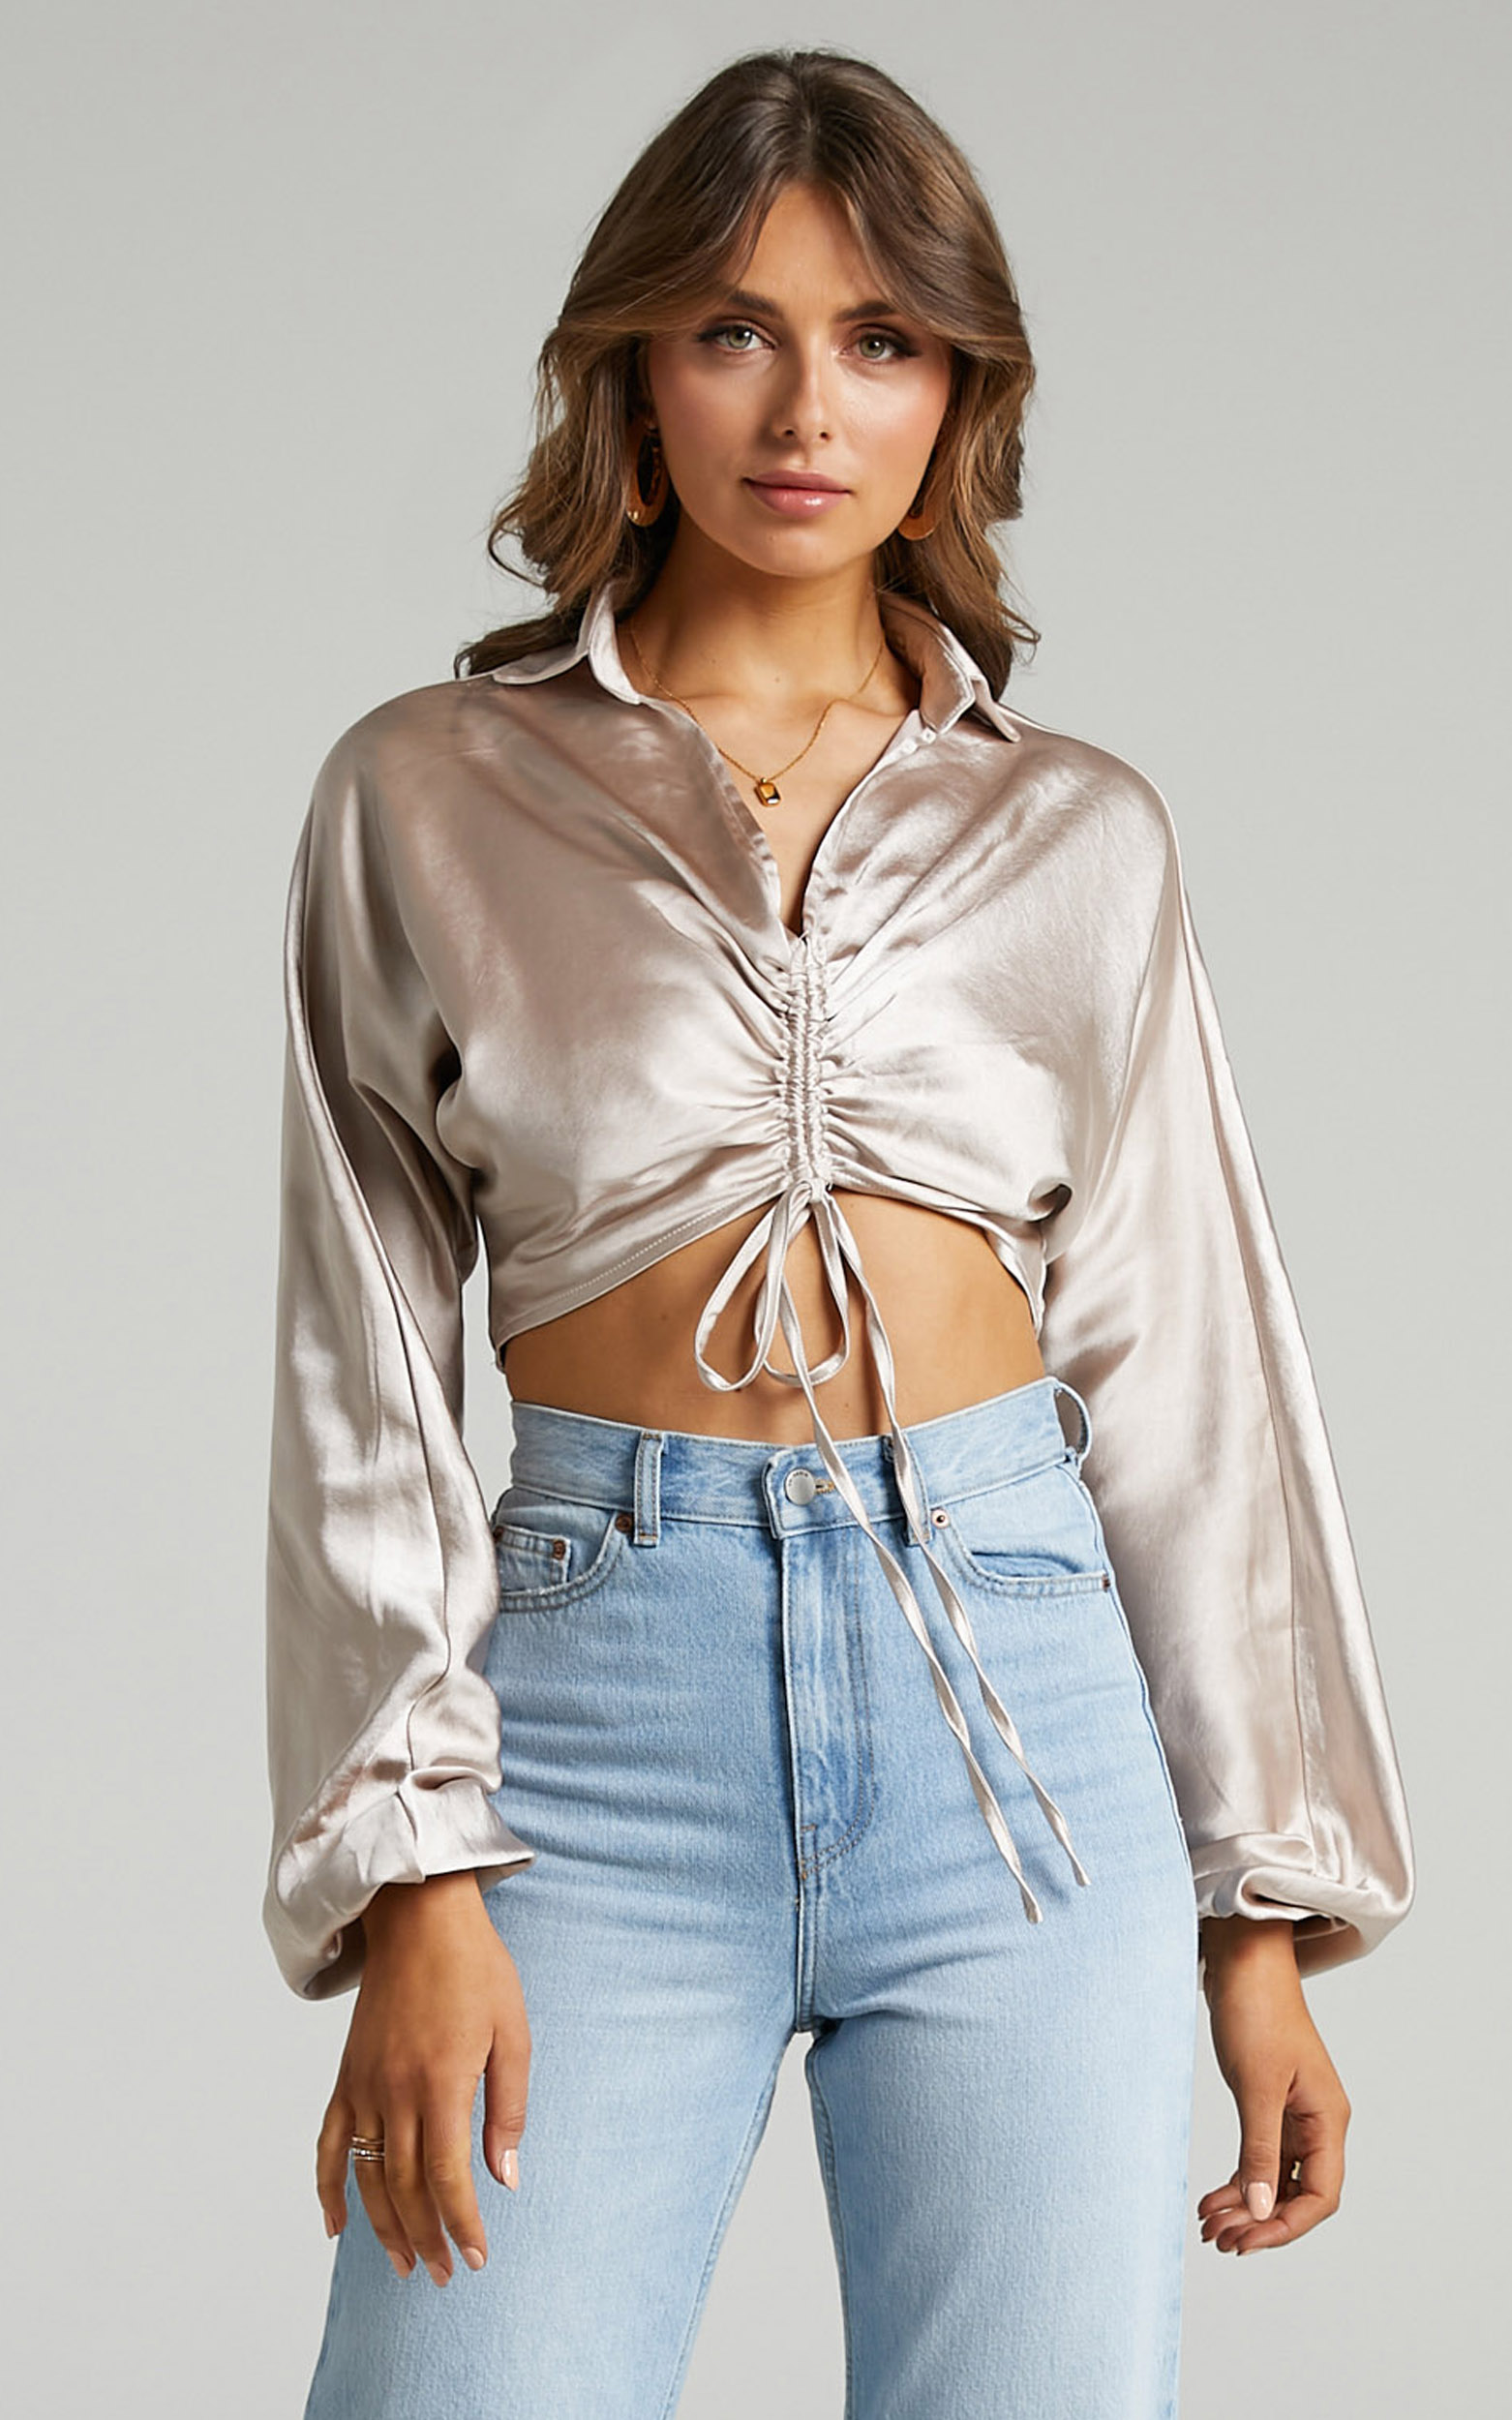 Rio Ruched Front Crop Top with Collar in Champagne Satin - 06, NEU1, hi-res image number null